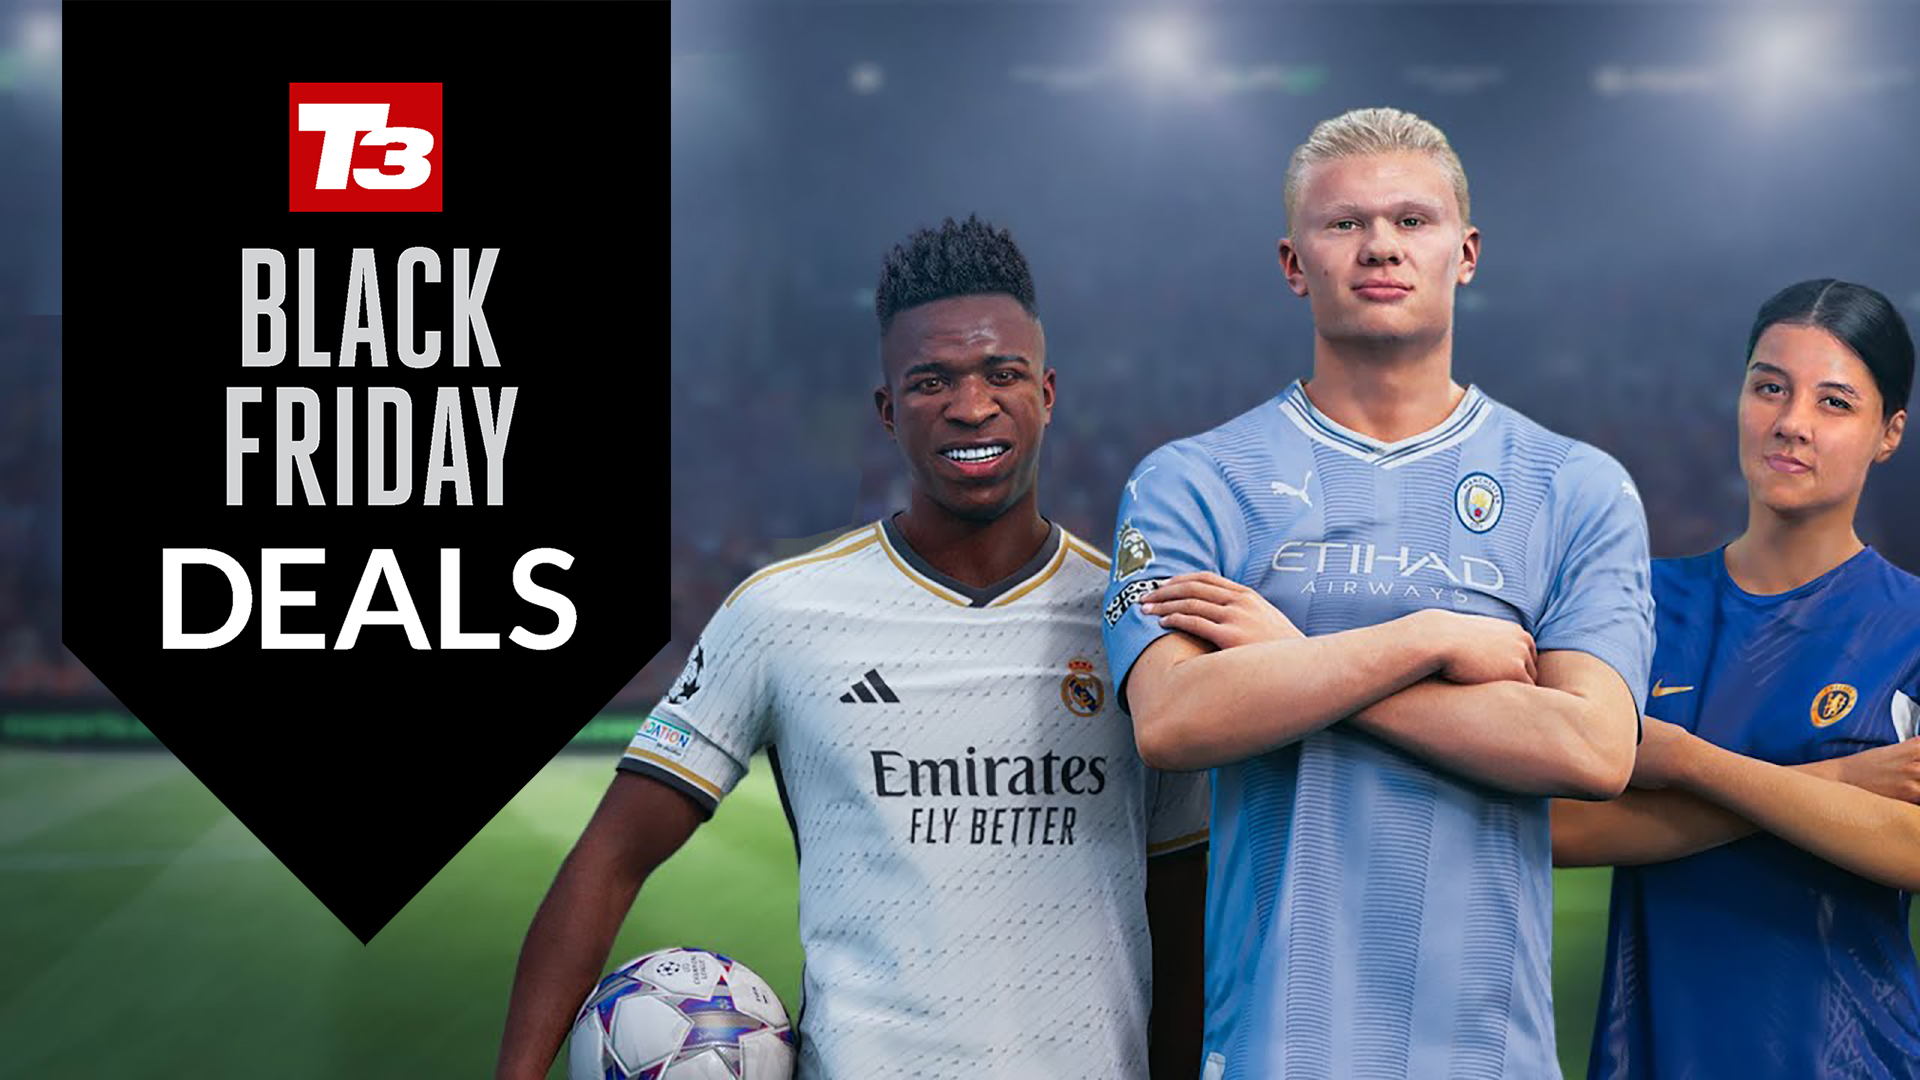 EA Sports FC 24 Prime Gaming rewards - How to redeem, packs, and more